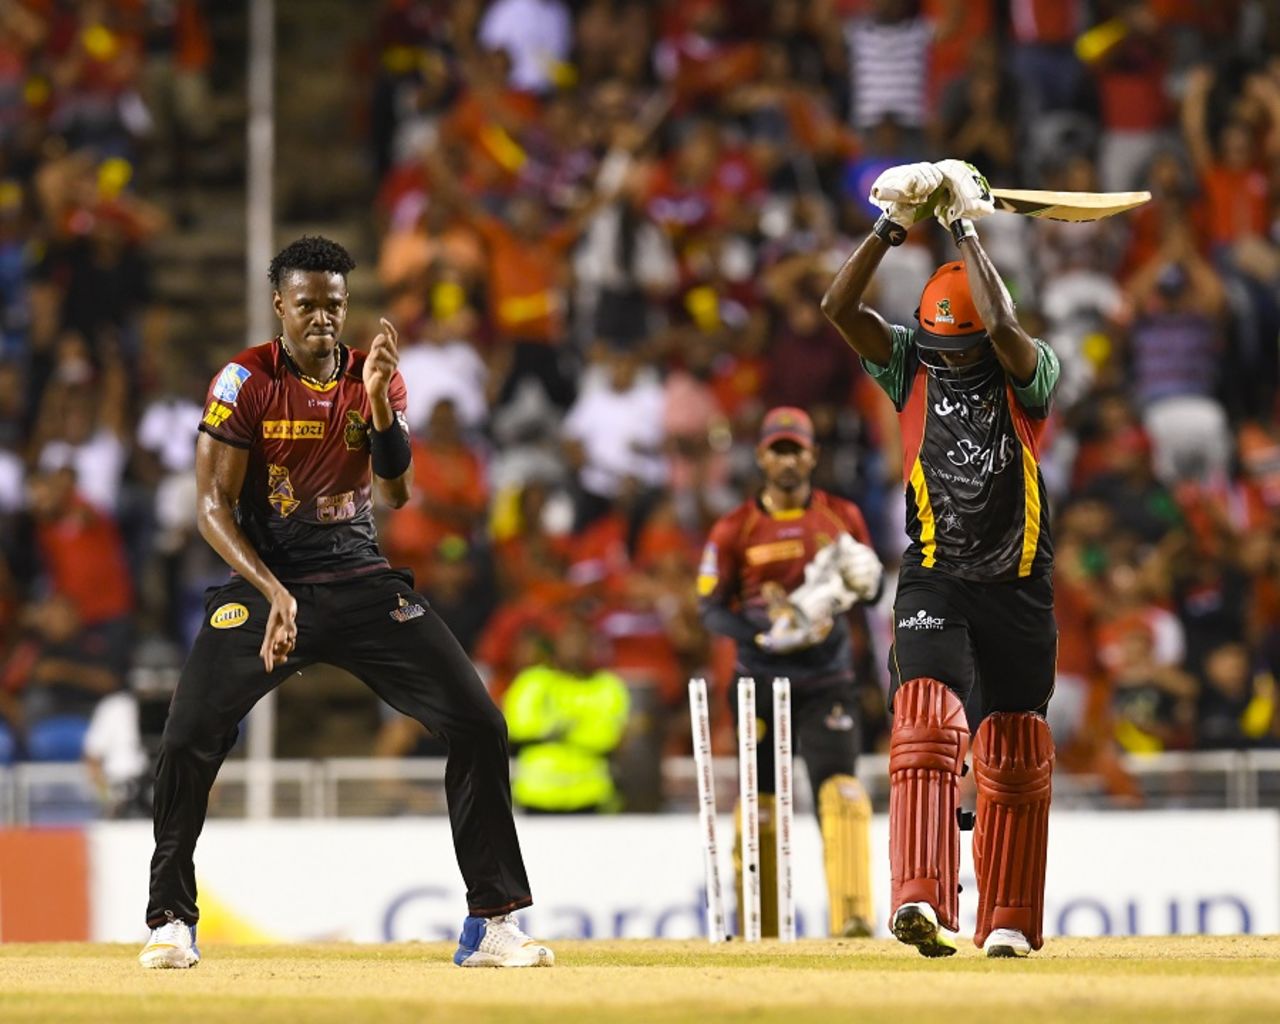 Ronsford Beaton - strained ankle and all - was impressive with his lengths, Trinbago Knight Riders v St Kitts and Nevis Patriots, CPL 2017, final, Tarouba, September 9, 2017